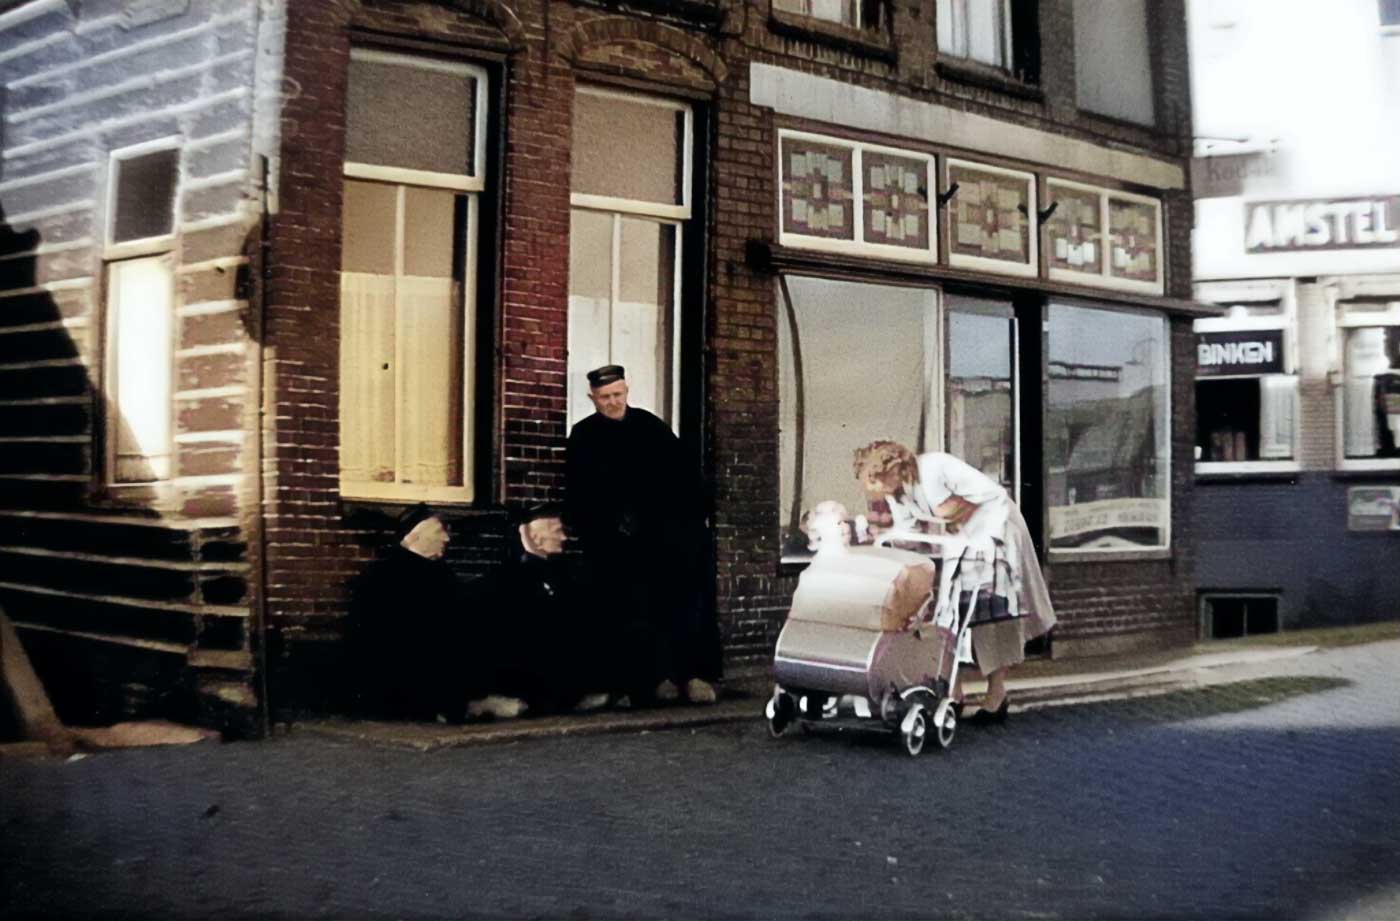 Almere-Netherlands Store and Some People 1950s